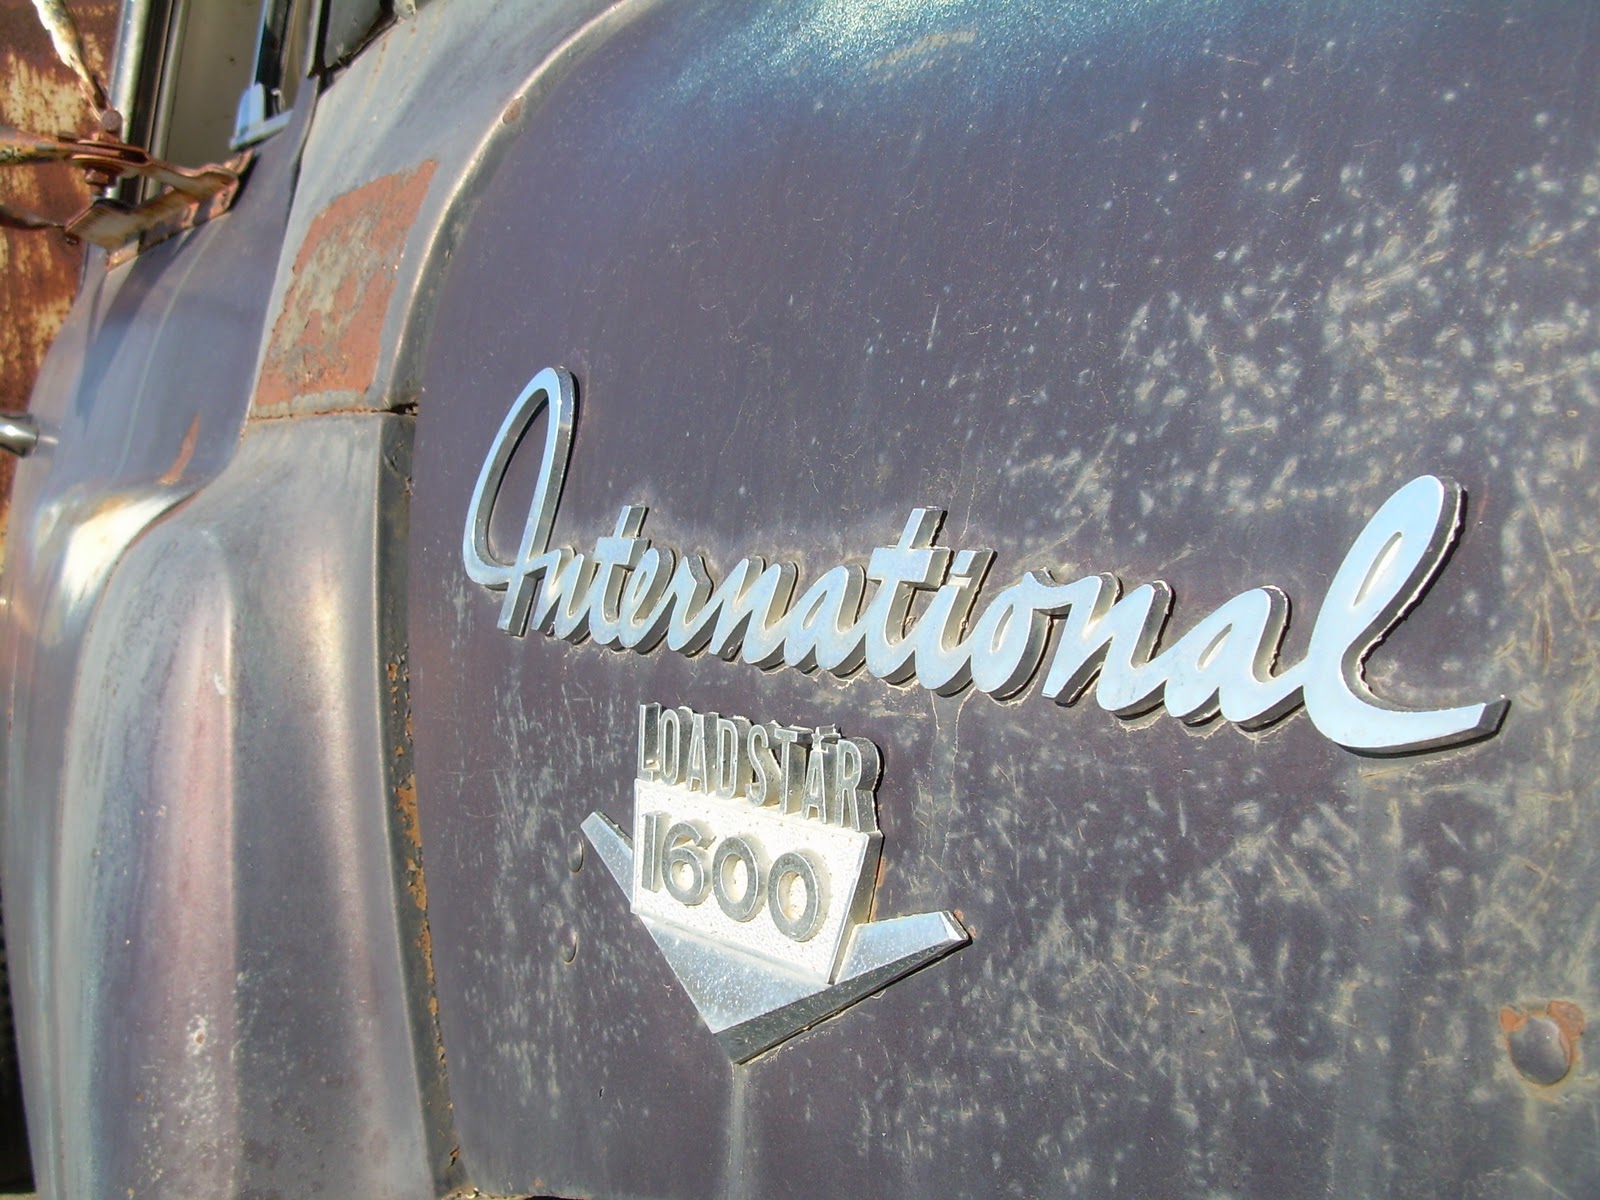 International Harvester Loadstar 1600 Photo Gallery: Photo #03 out ...